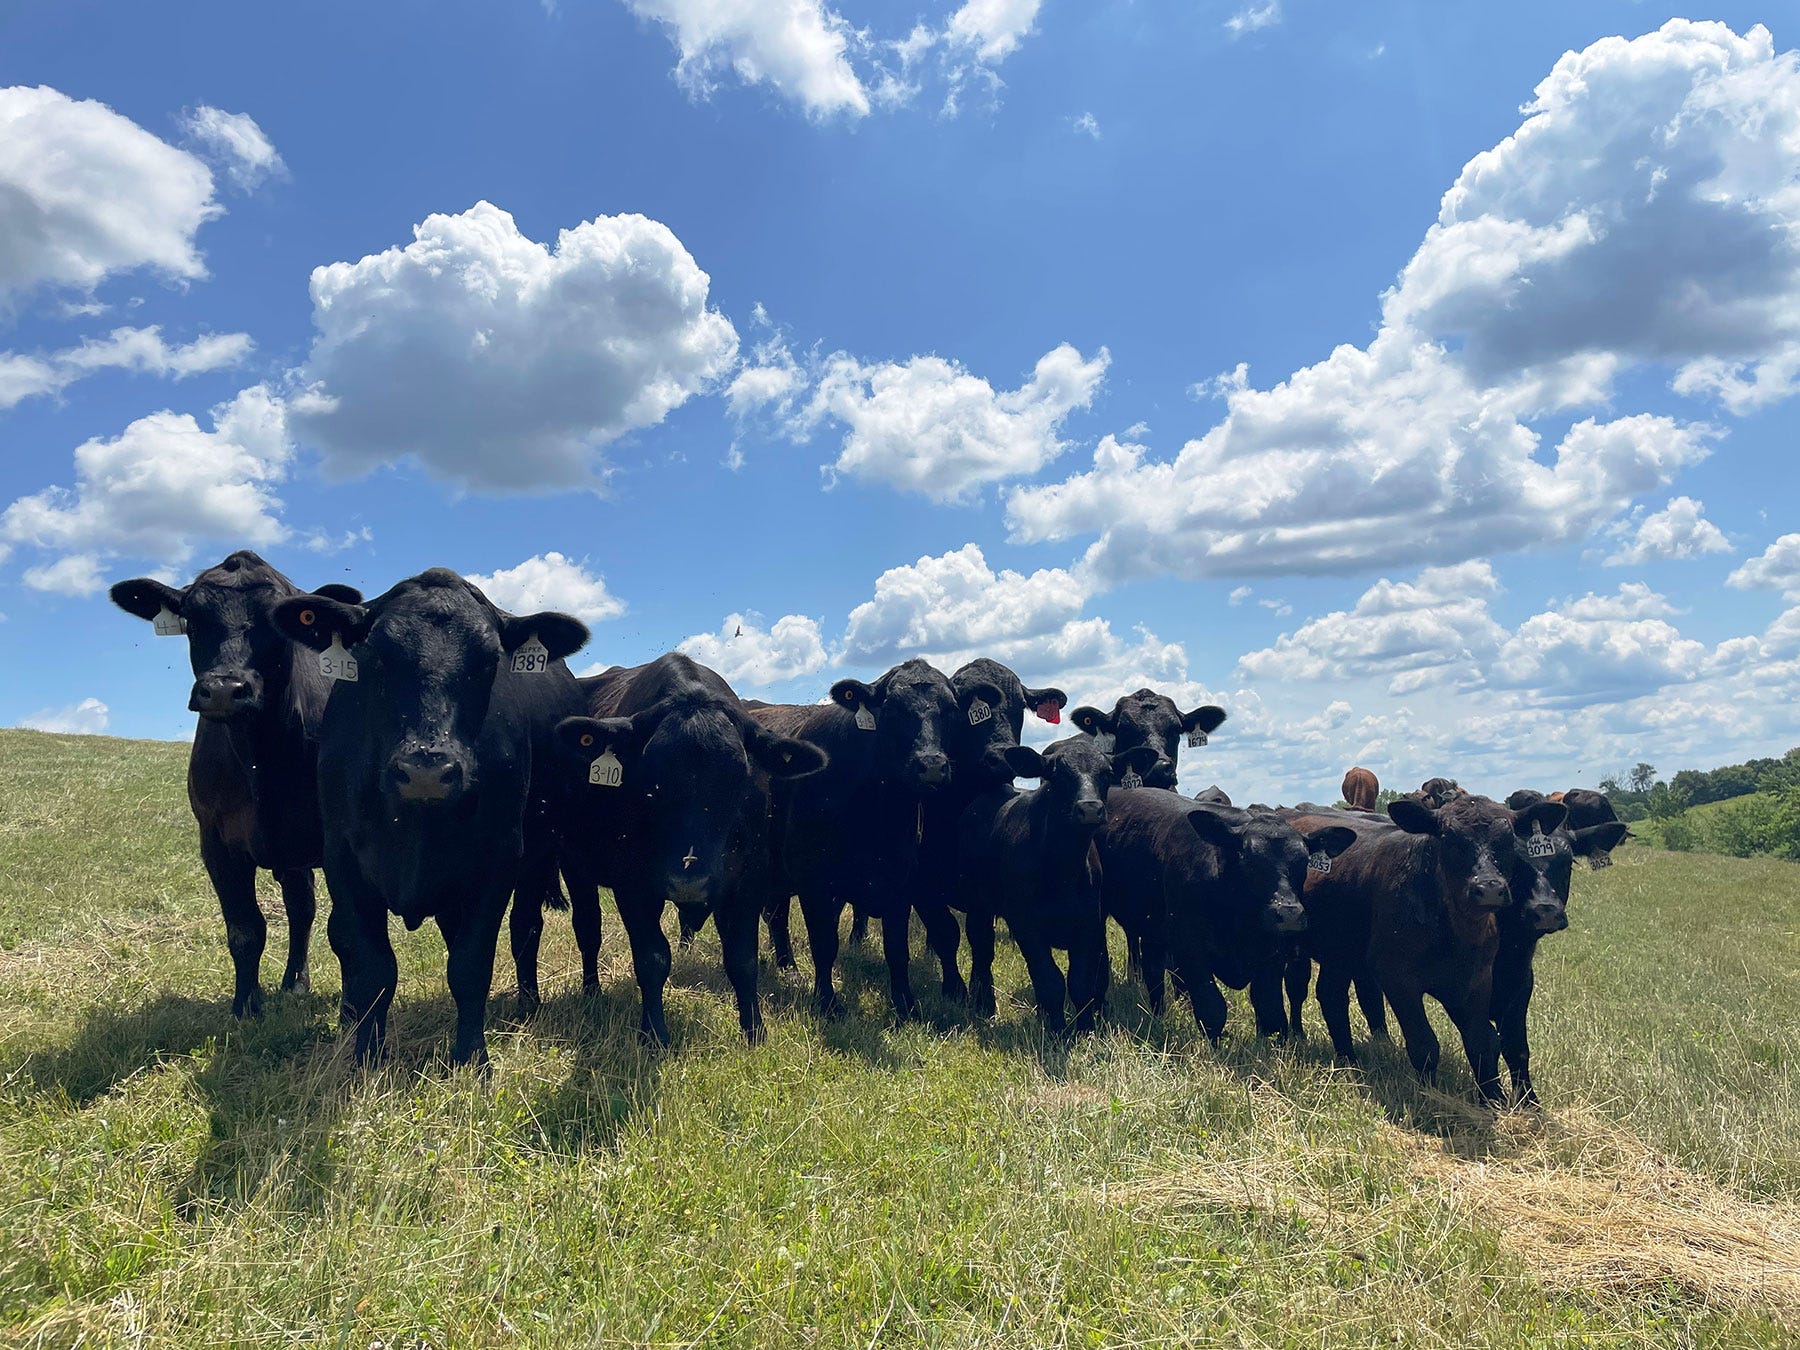 A herd of cattle in a field looking at the camera